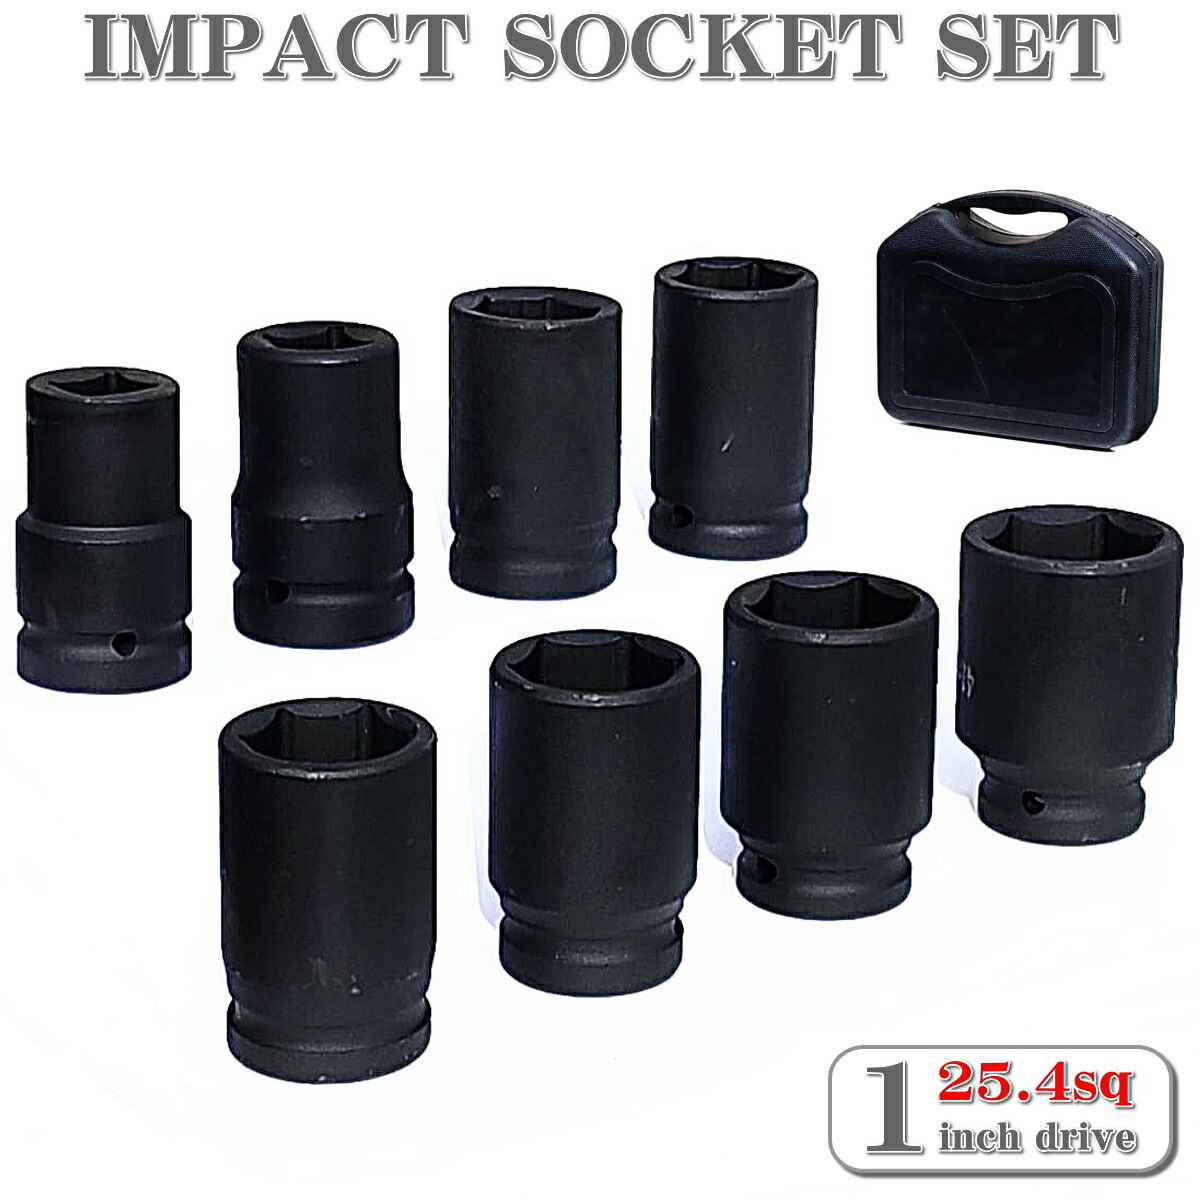  air impact wrench large for 2800N.m 25.4mm Short shaft 1 -inch socket BOX set 